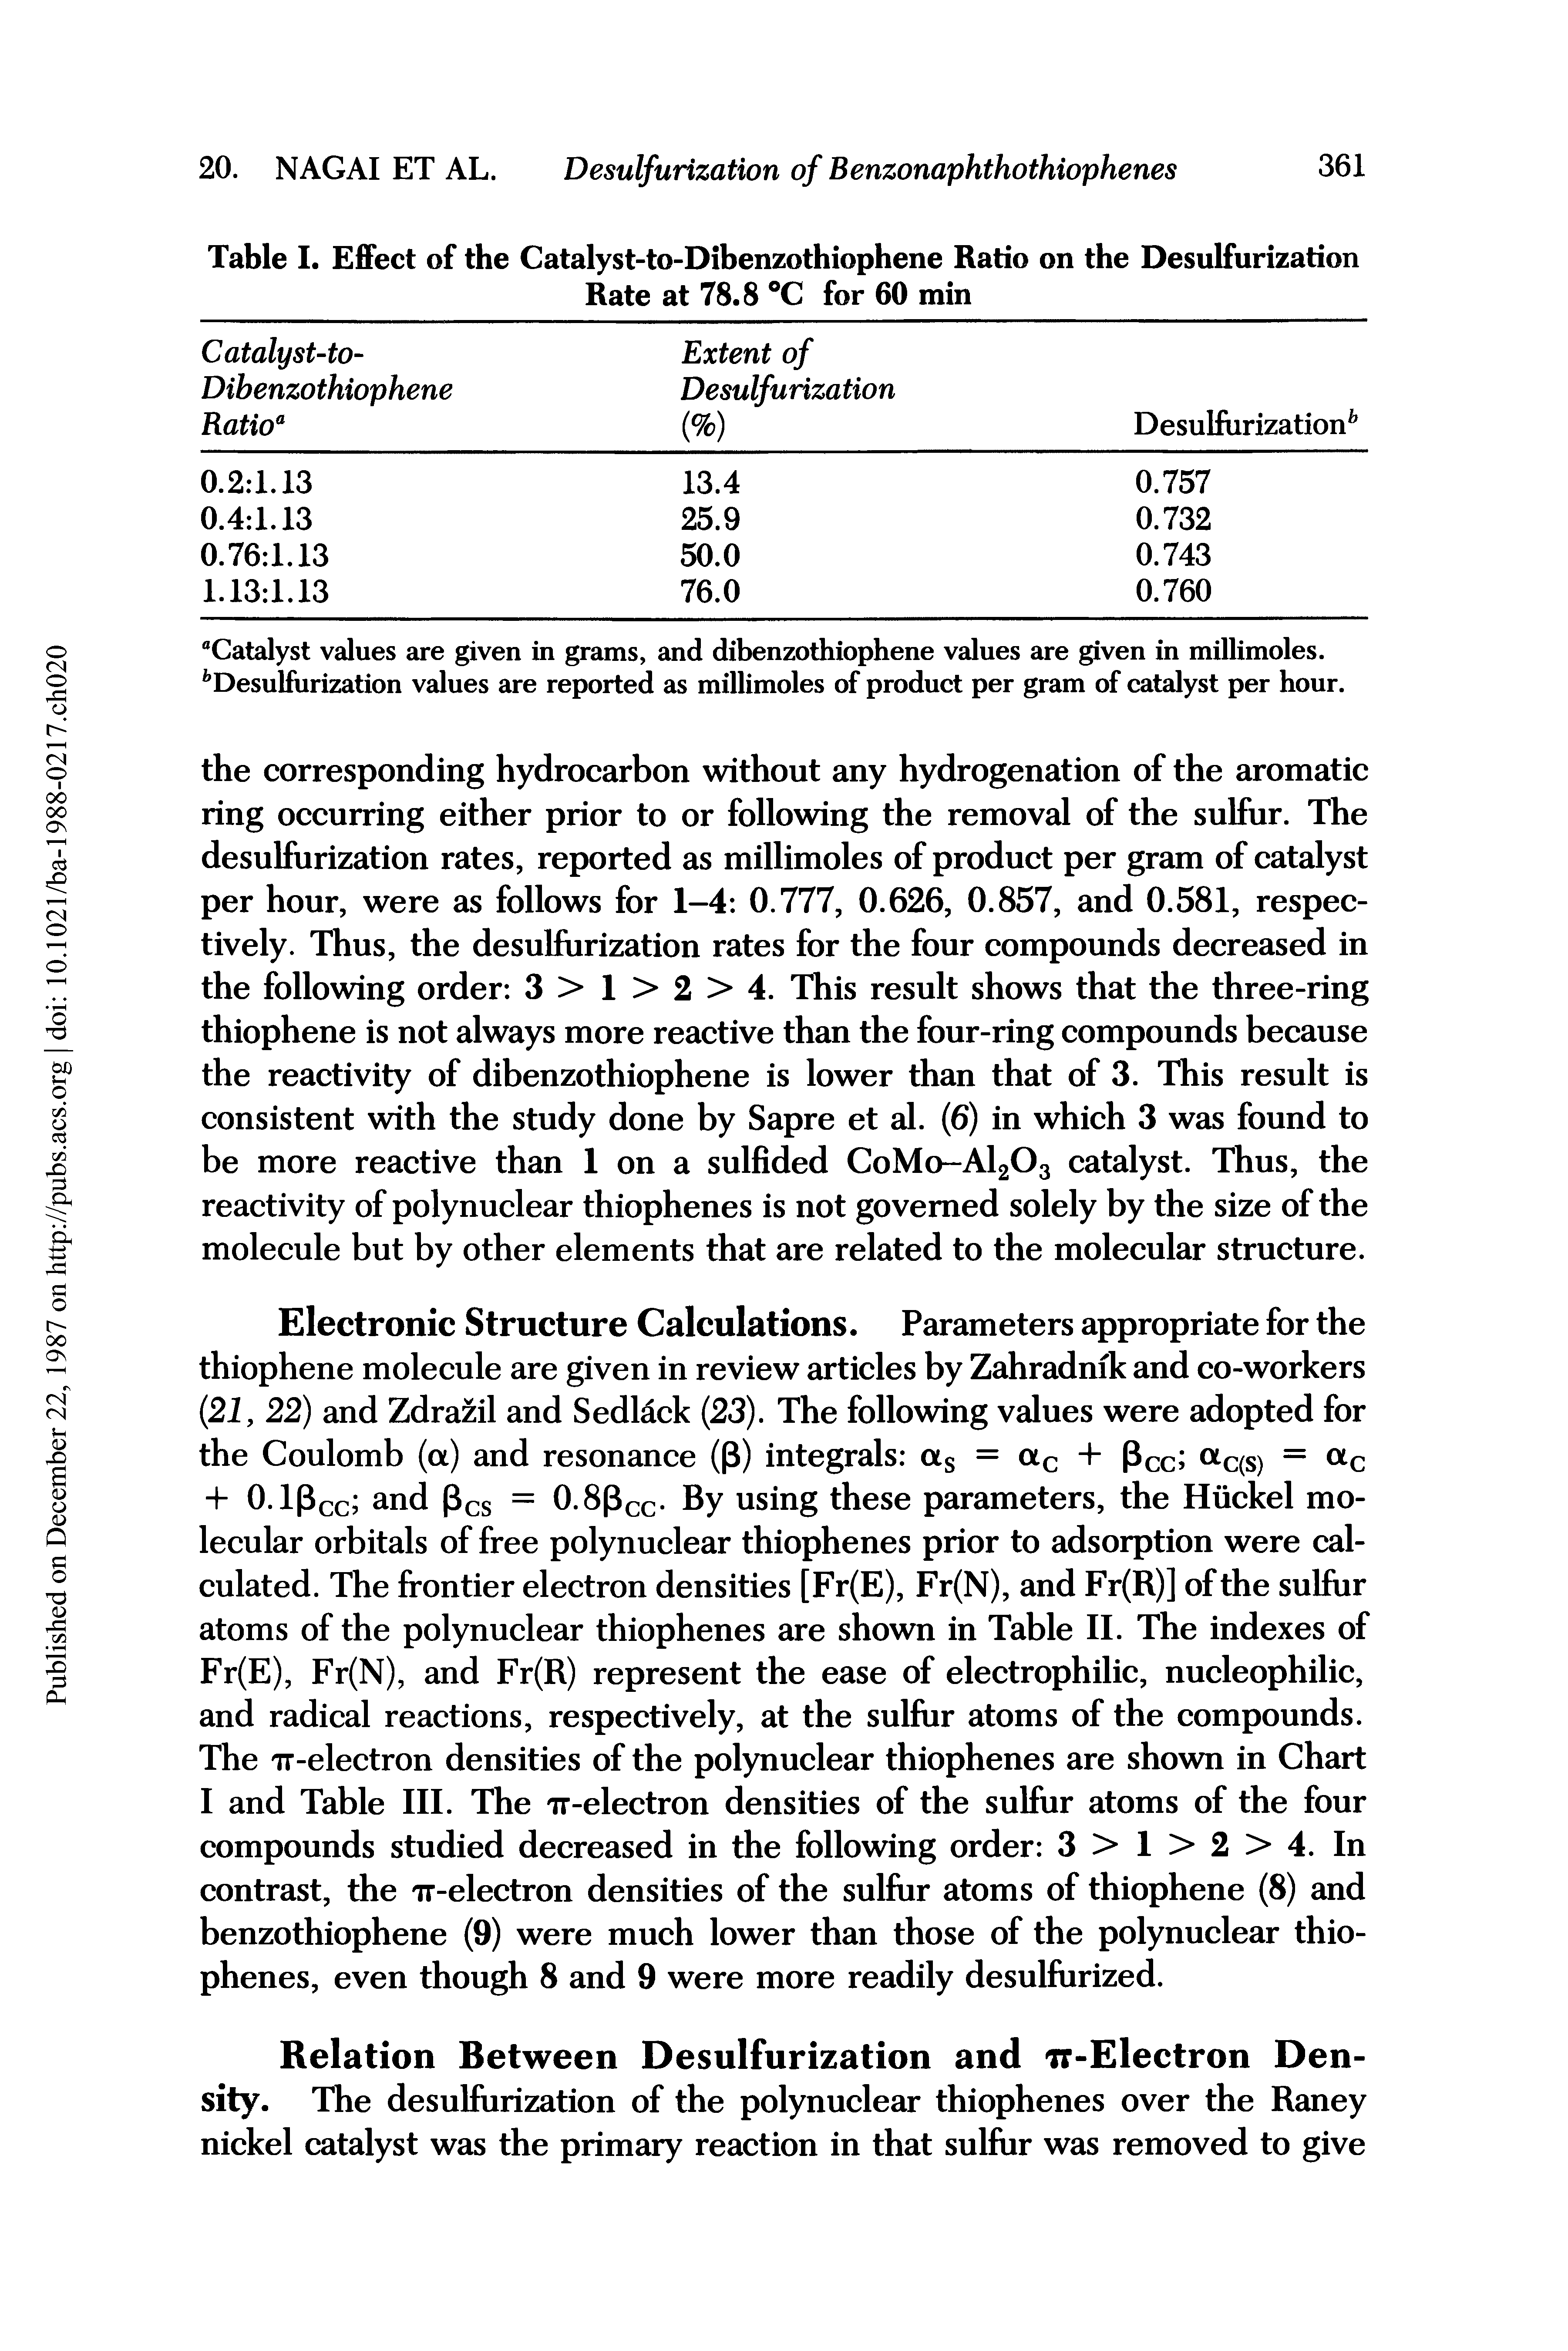 Table I. Effect of the Catalyst-to-Dibenzothiophene Ratio on the Desulfurization Rate at 78.8 °C for 60 min...